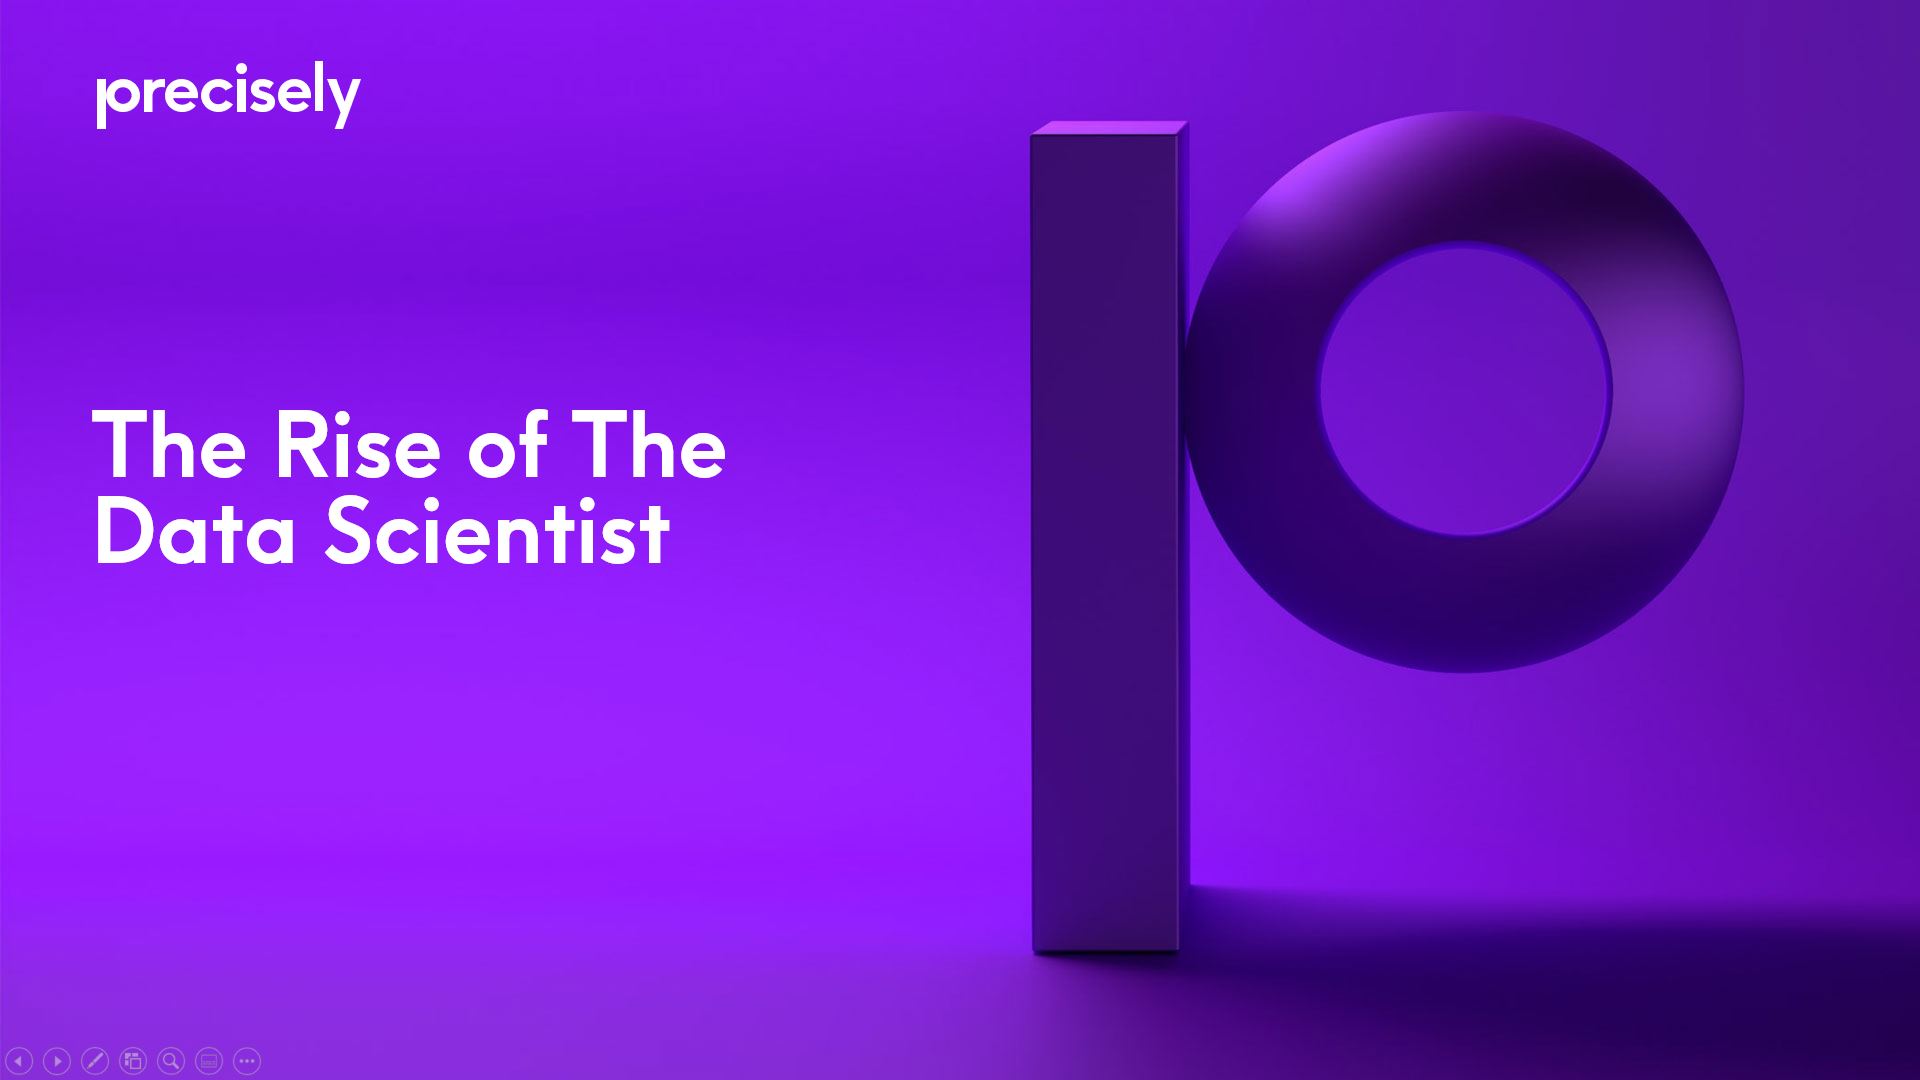 The Rise of the Data Scientist